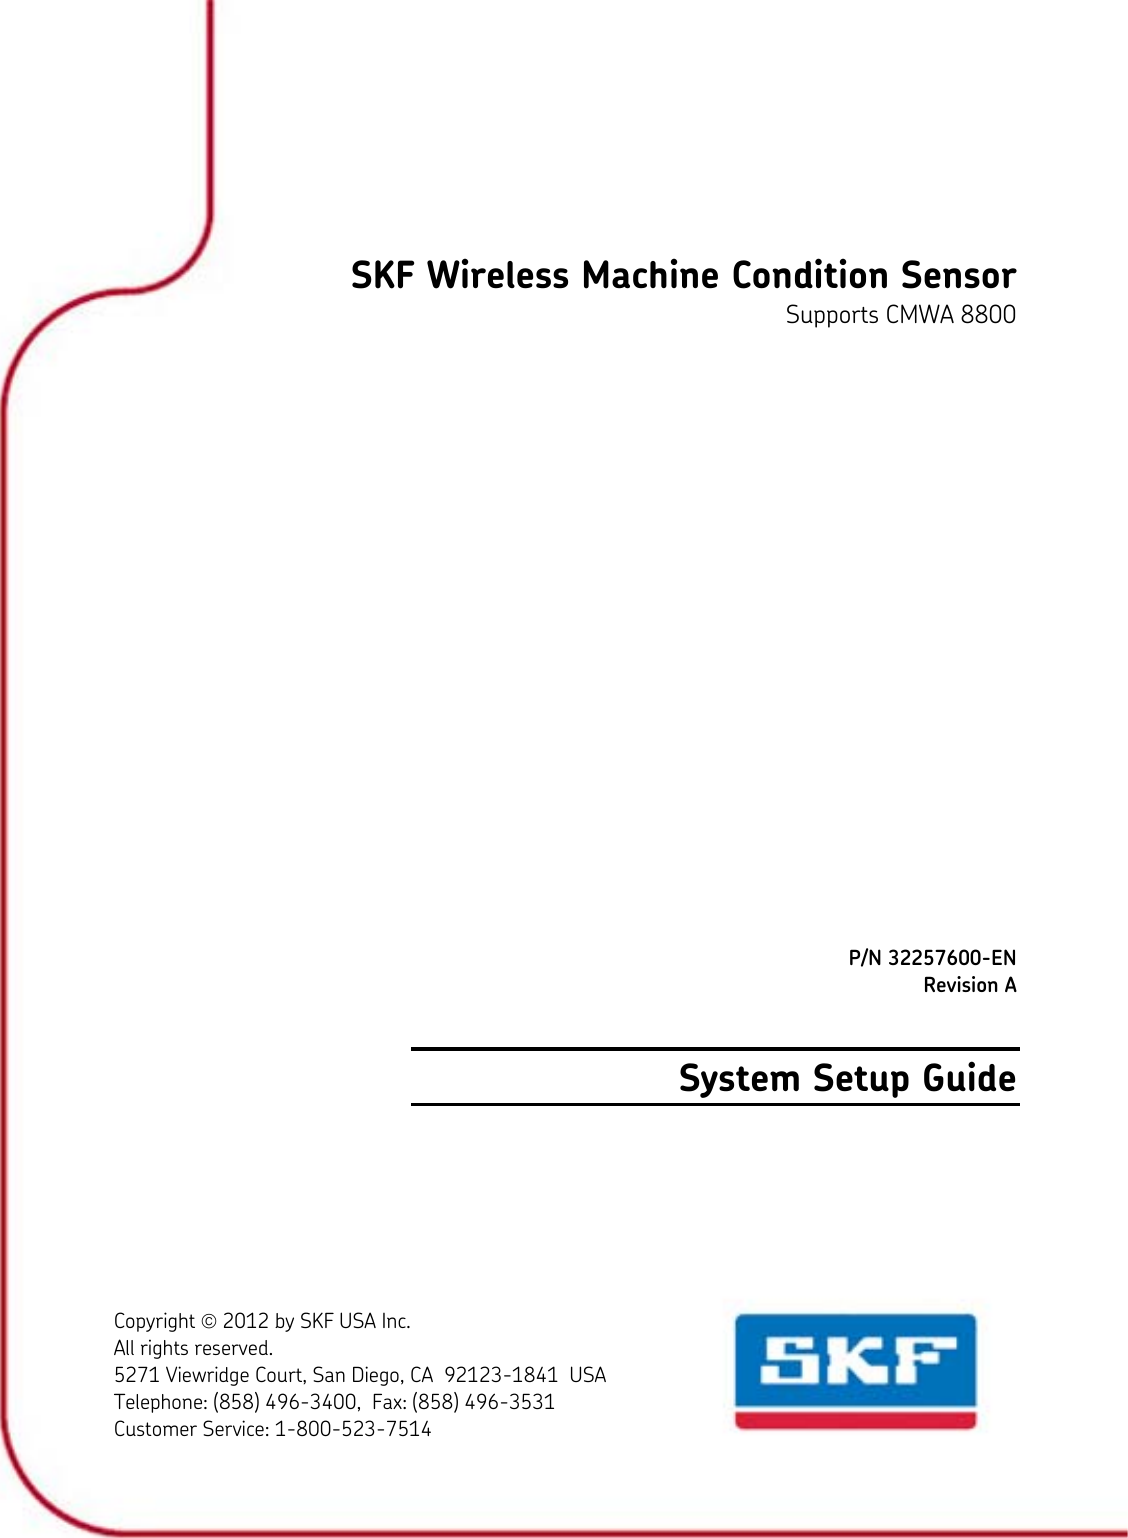  SKF Wireless Machine Condition Sensor Supports CMWA 8800         P/N 32257600-EN Revision A System Setup Guide Copyright  2012 by SKF USA Inc. All rights reserved. 5271 Viewridge Court, San Diego, CA  92123-1841  USA Telephone: (858) 496-3400,  Fax: (858) 496-3531 Customer Service: 1-800-523-7514 